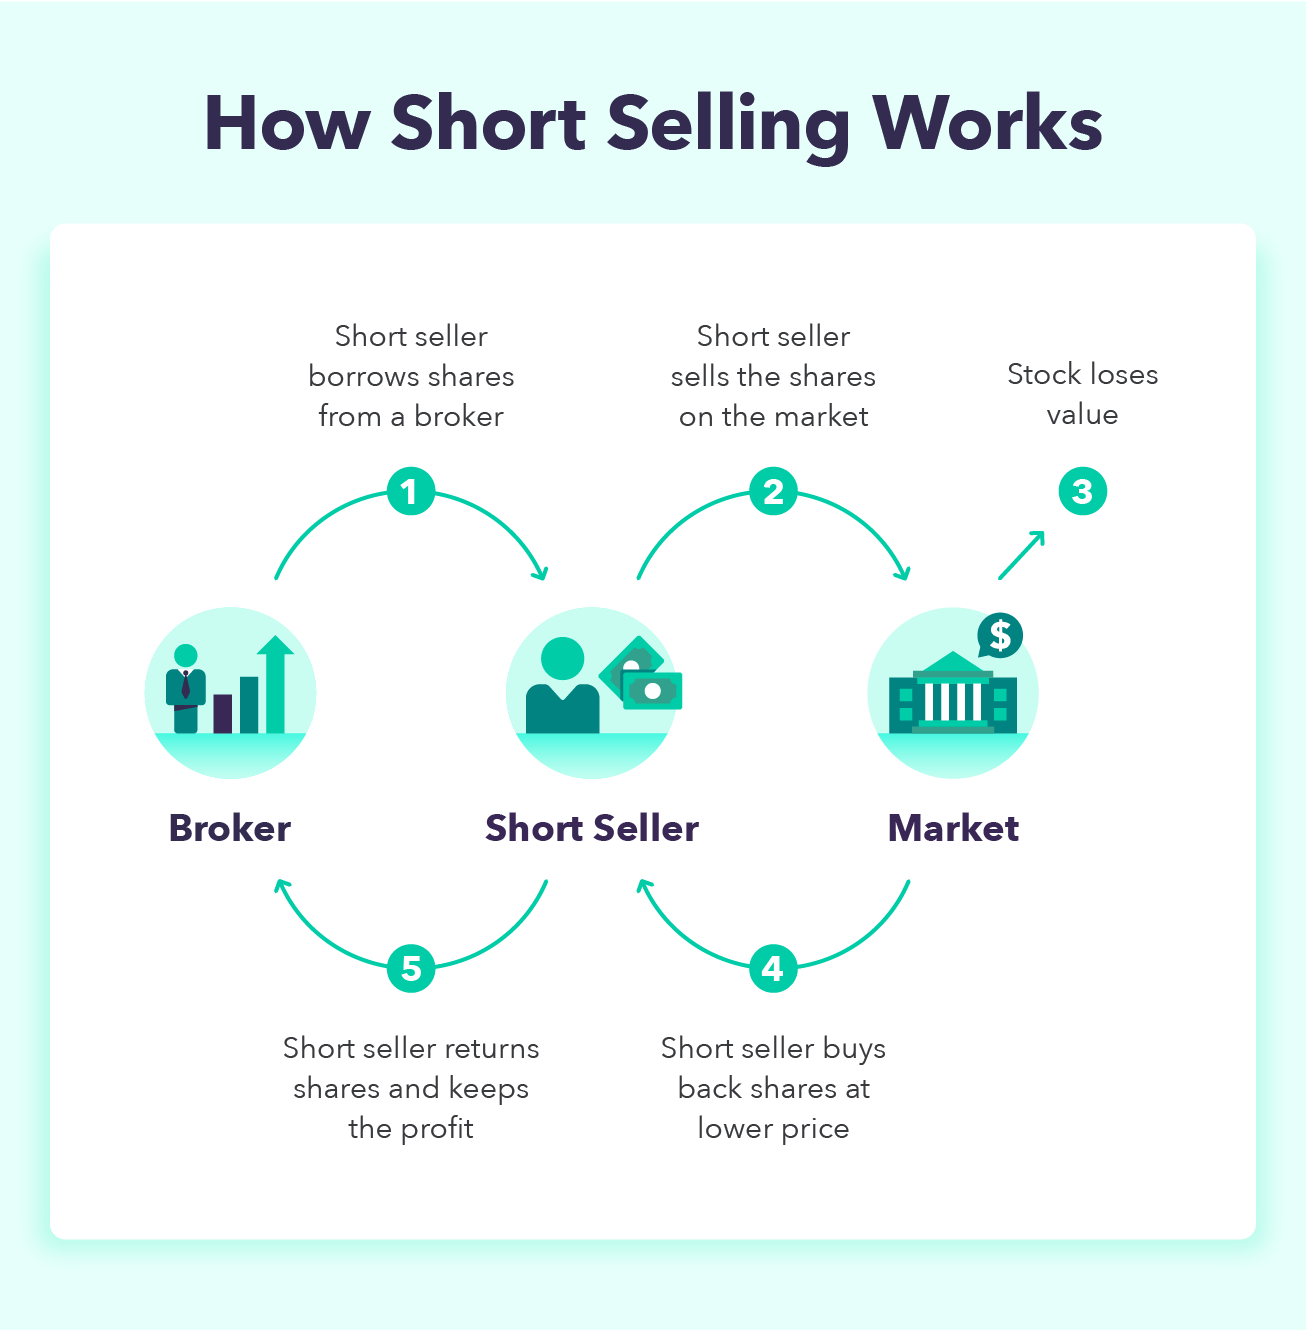 the process of short selling from start to finish considering the stock loses value